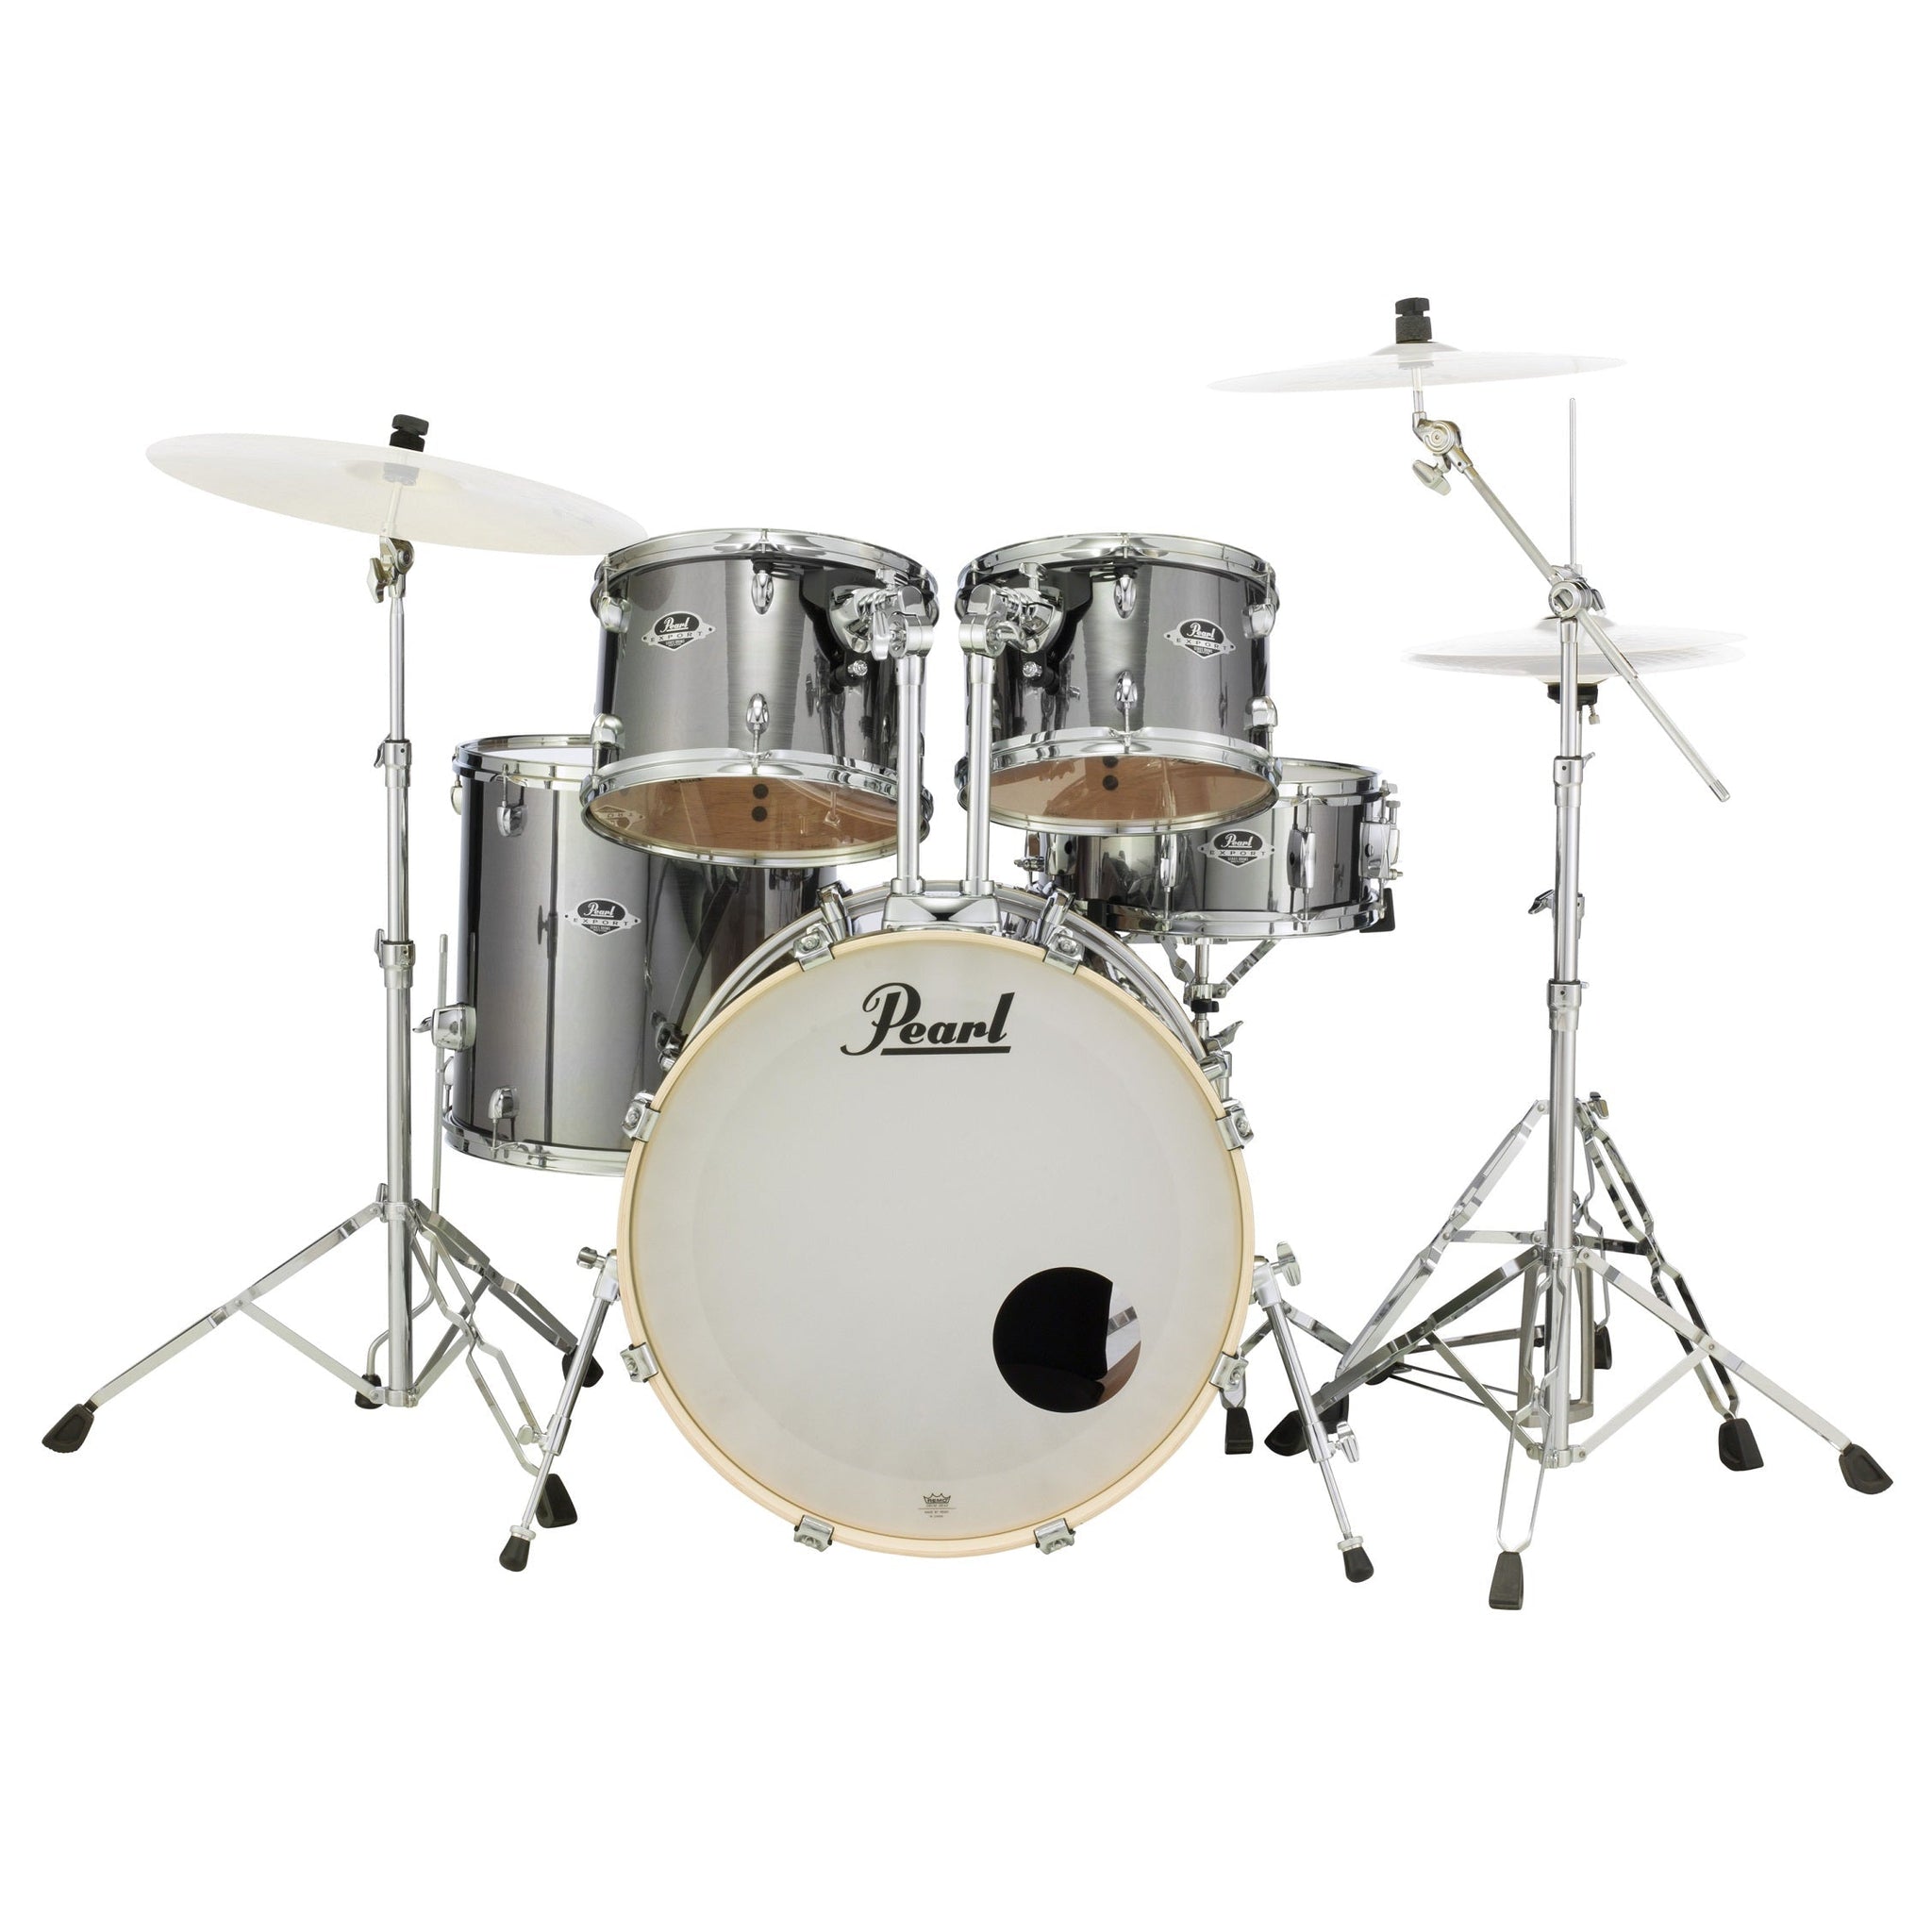 Pearl EXX725PC21 Export Series 5-Piece Drum Shell Pack-Smokey Chrome-Music World Academy